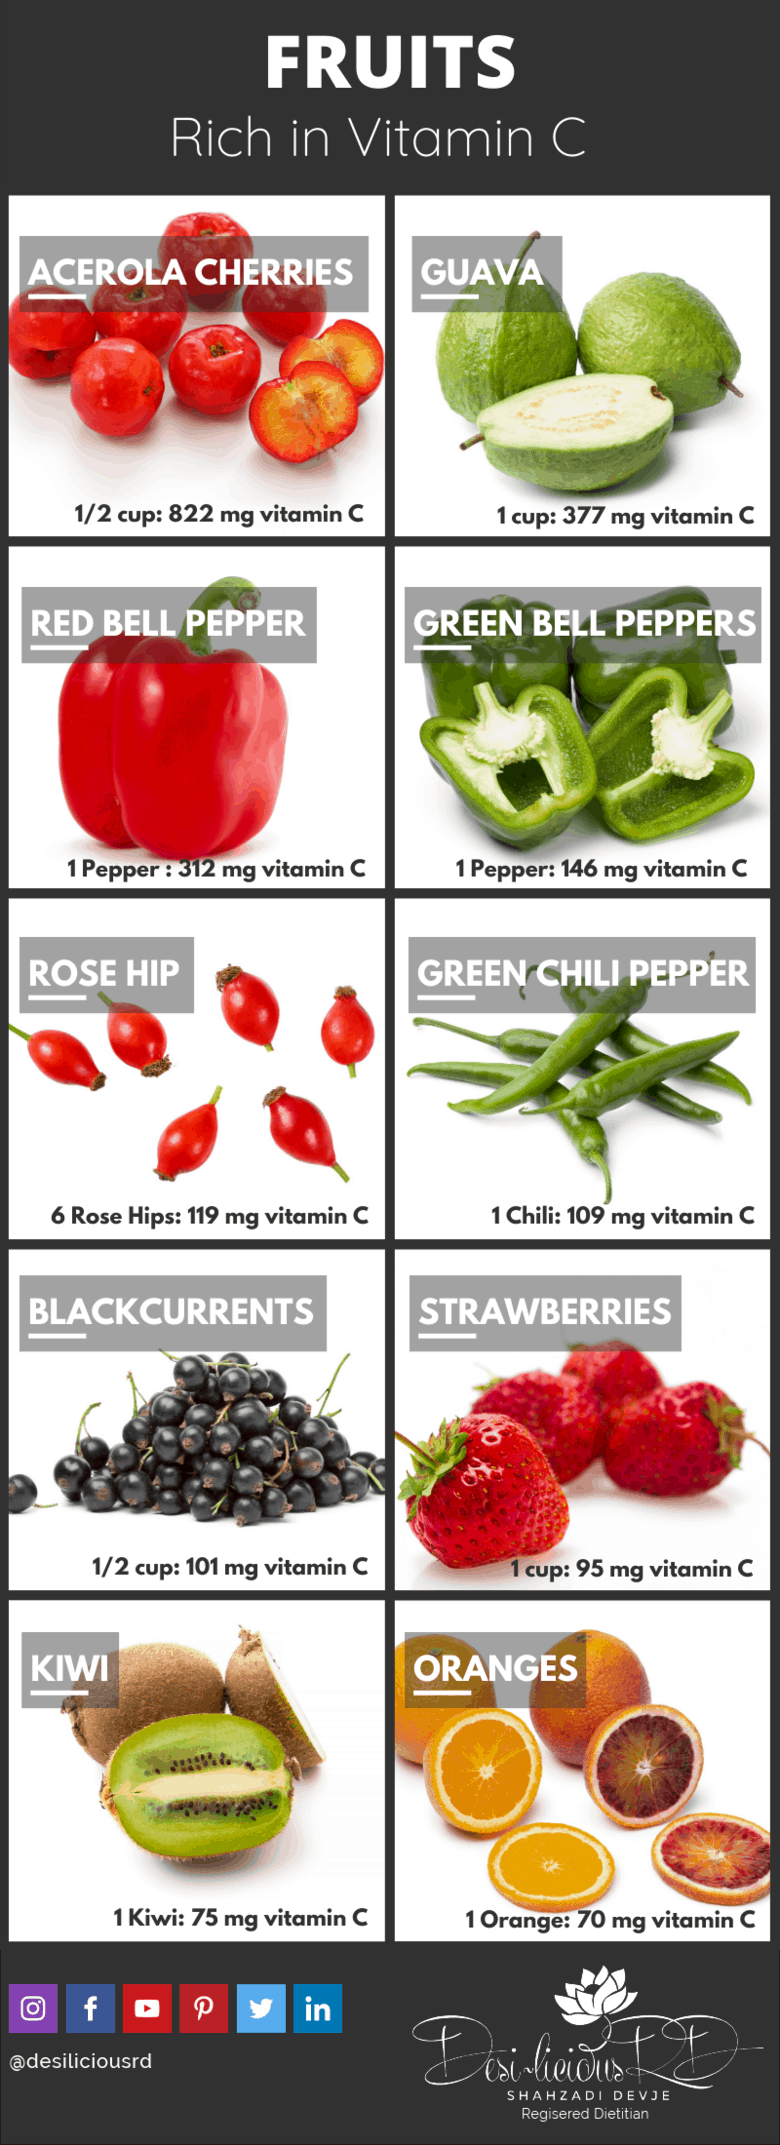 infographic listing fruits rich in vitamin c to help boost immunity